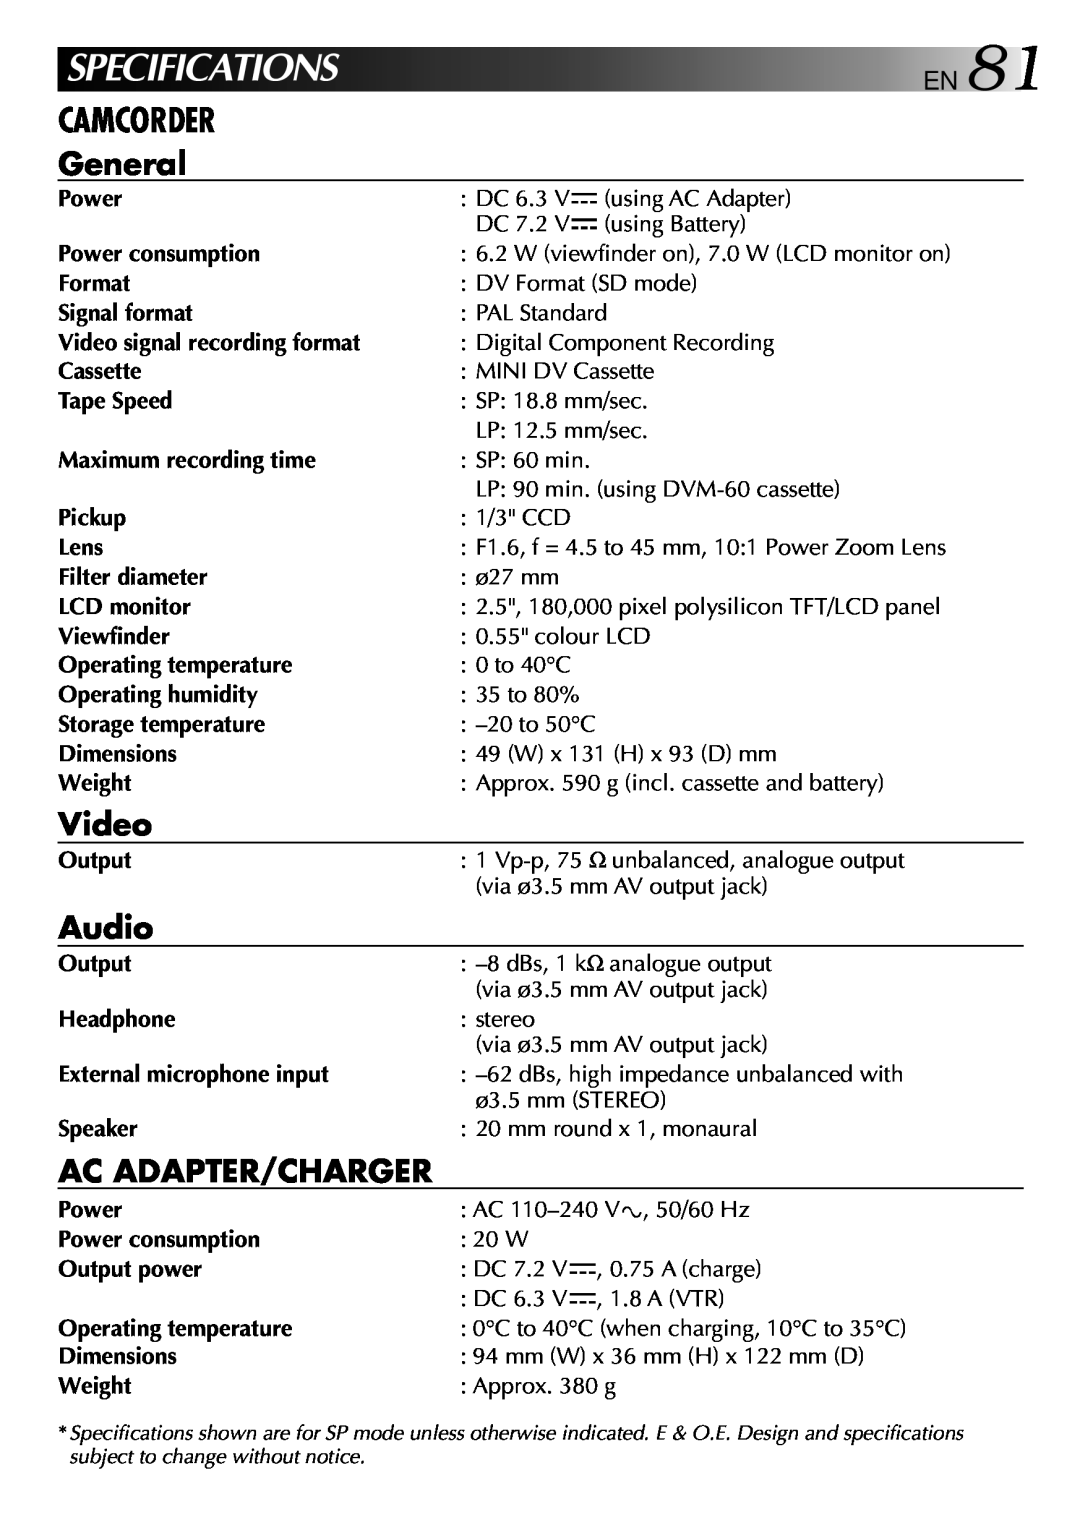 JVC 0797TOV*UN*VP Specifications, Camcorder, General, Video, Audio, Ac Adapter/Charger, Power consumption, Format 